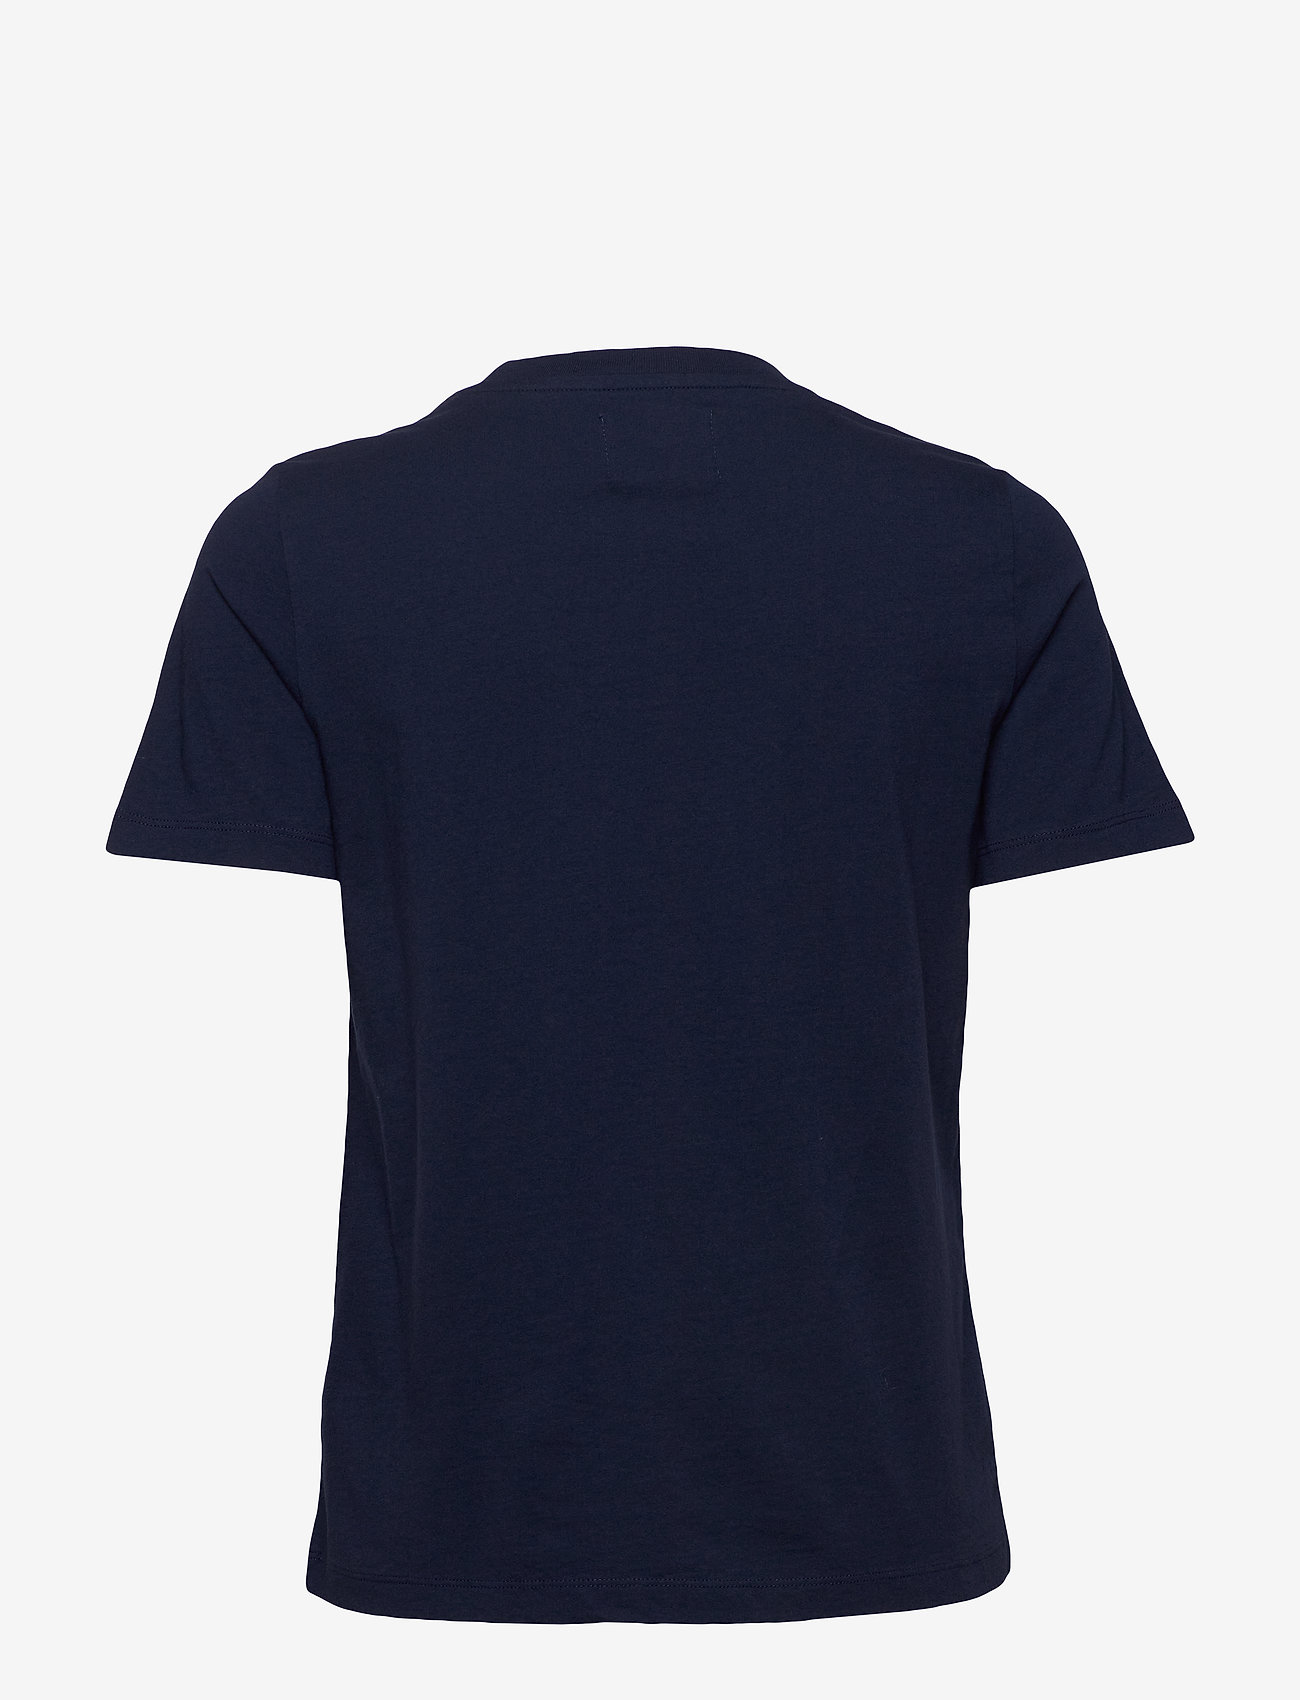 Double A by Wood Wood - Mia T-shirt - t-shirts & tops - navy - 1